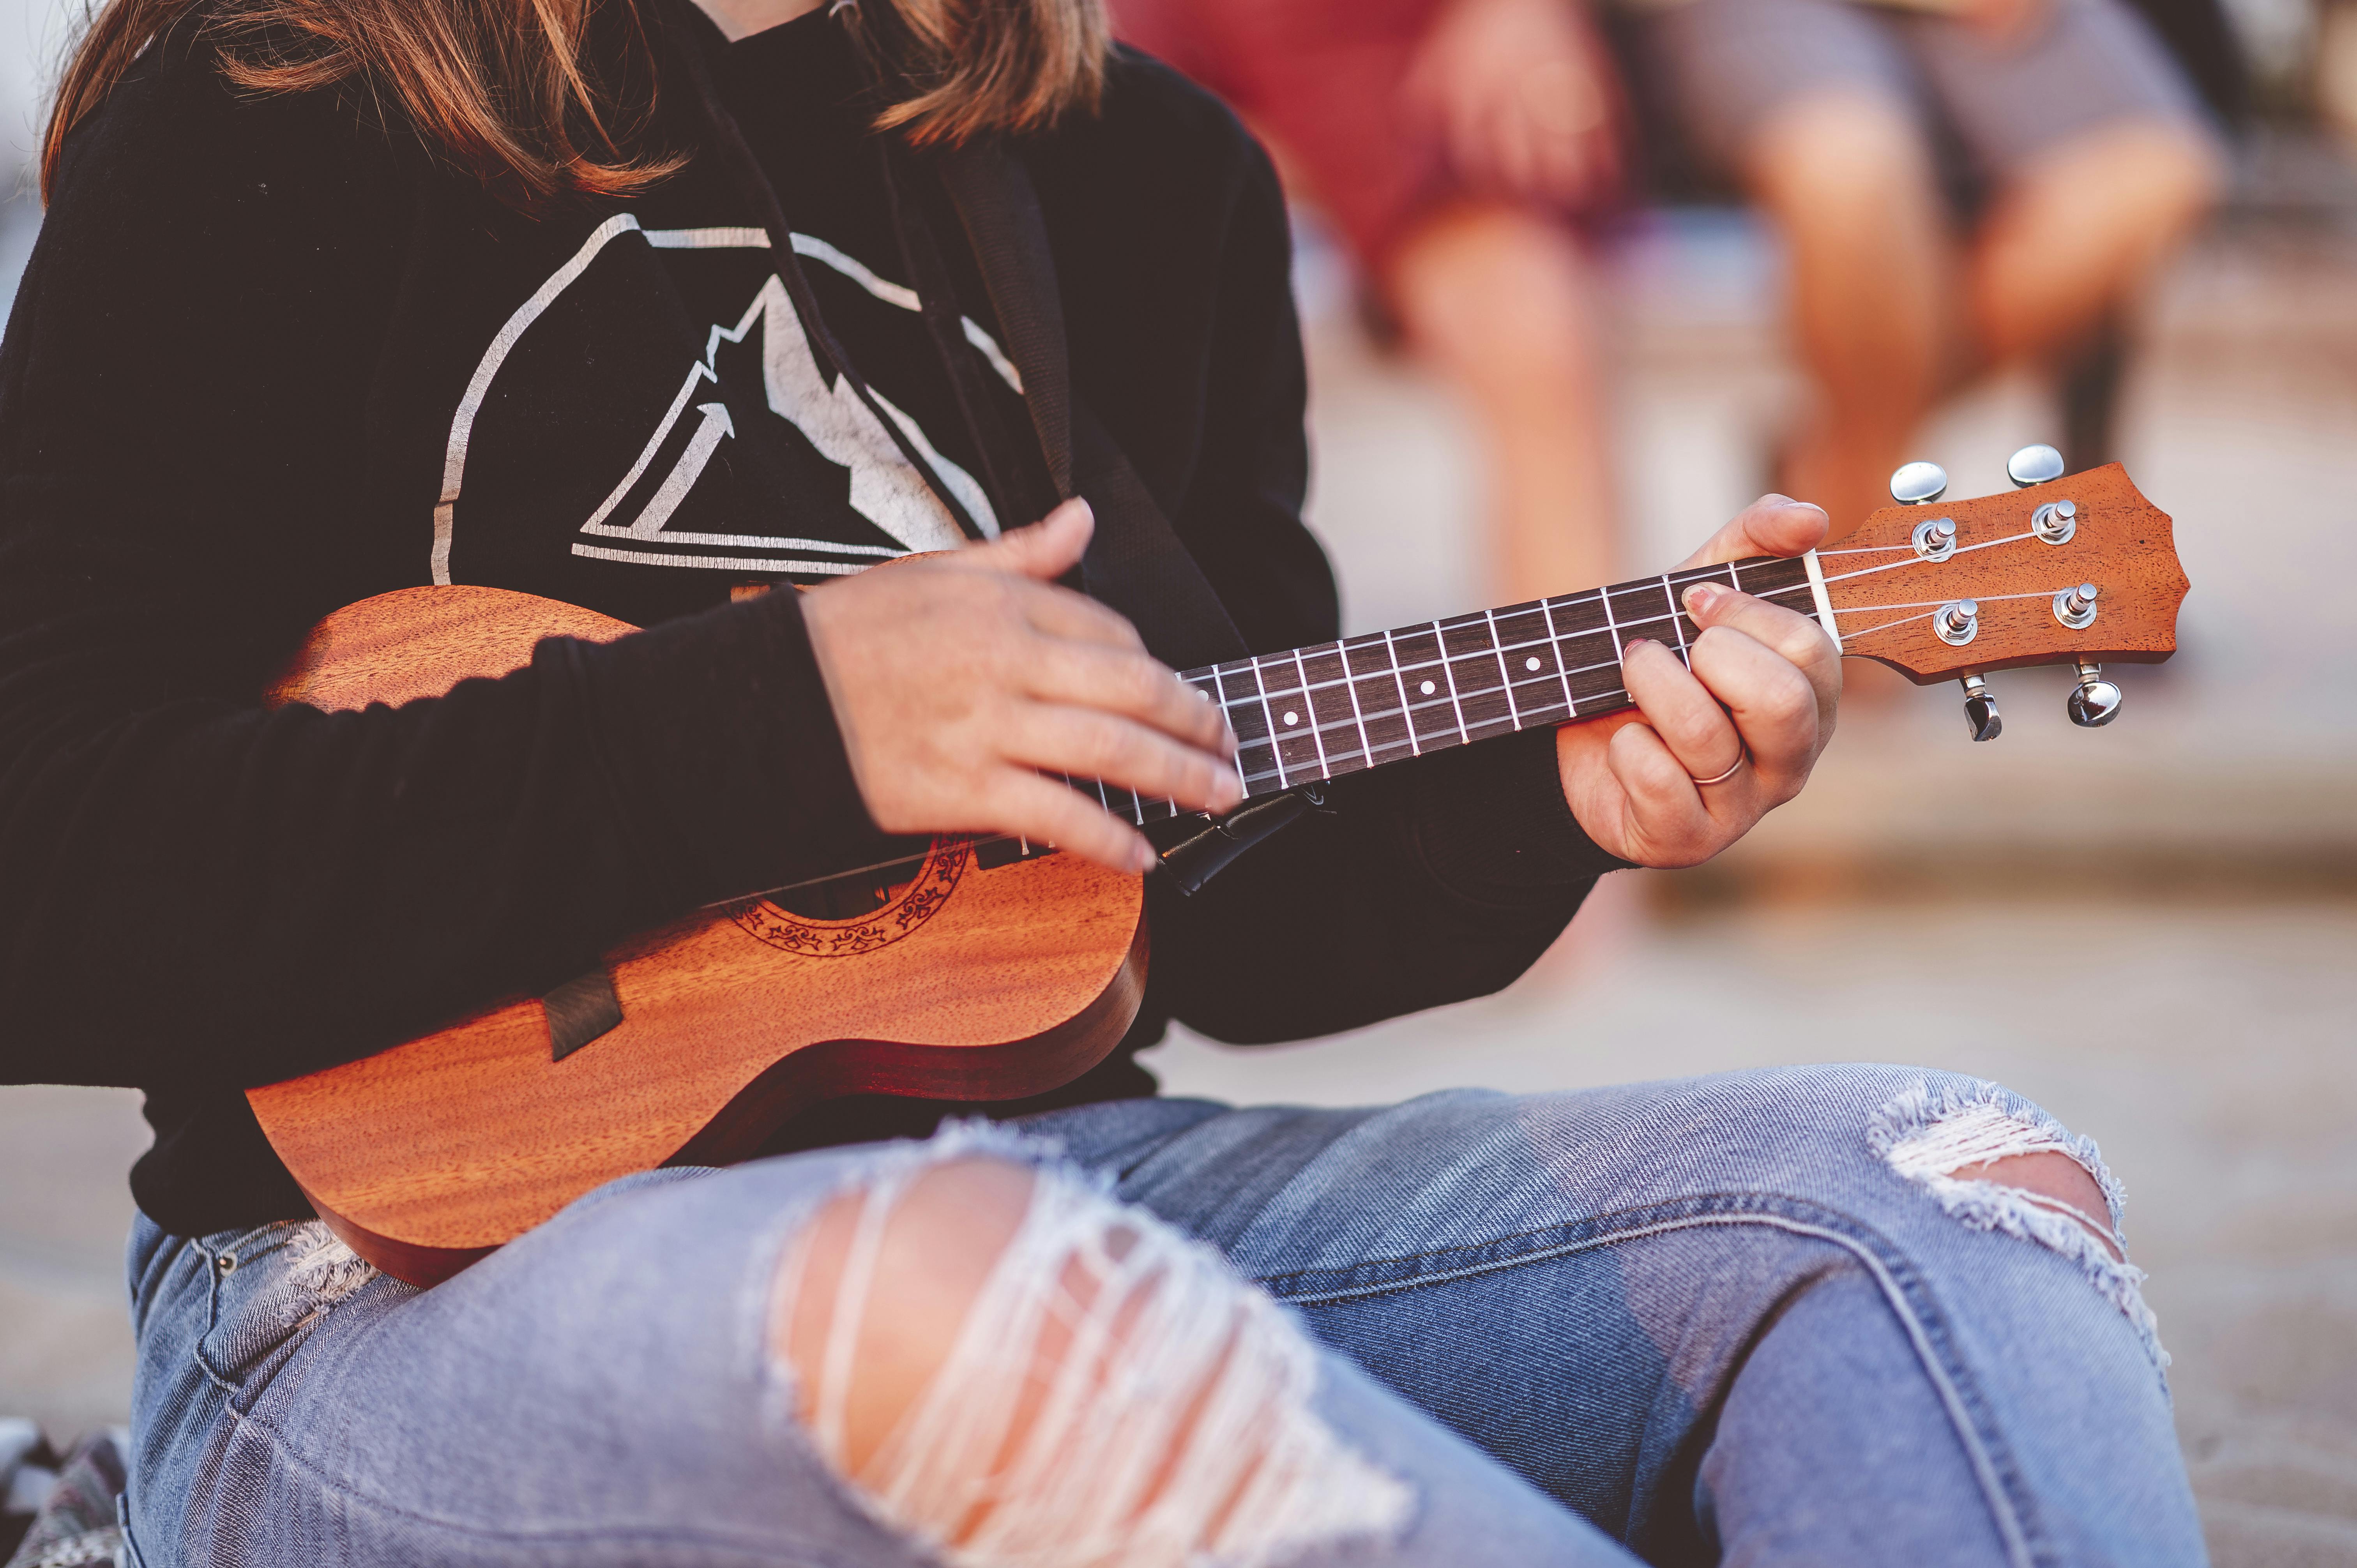  woman playing ukulele with ripped jeans and black sweatshirt